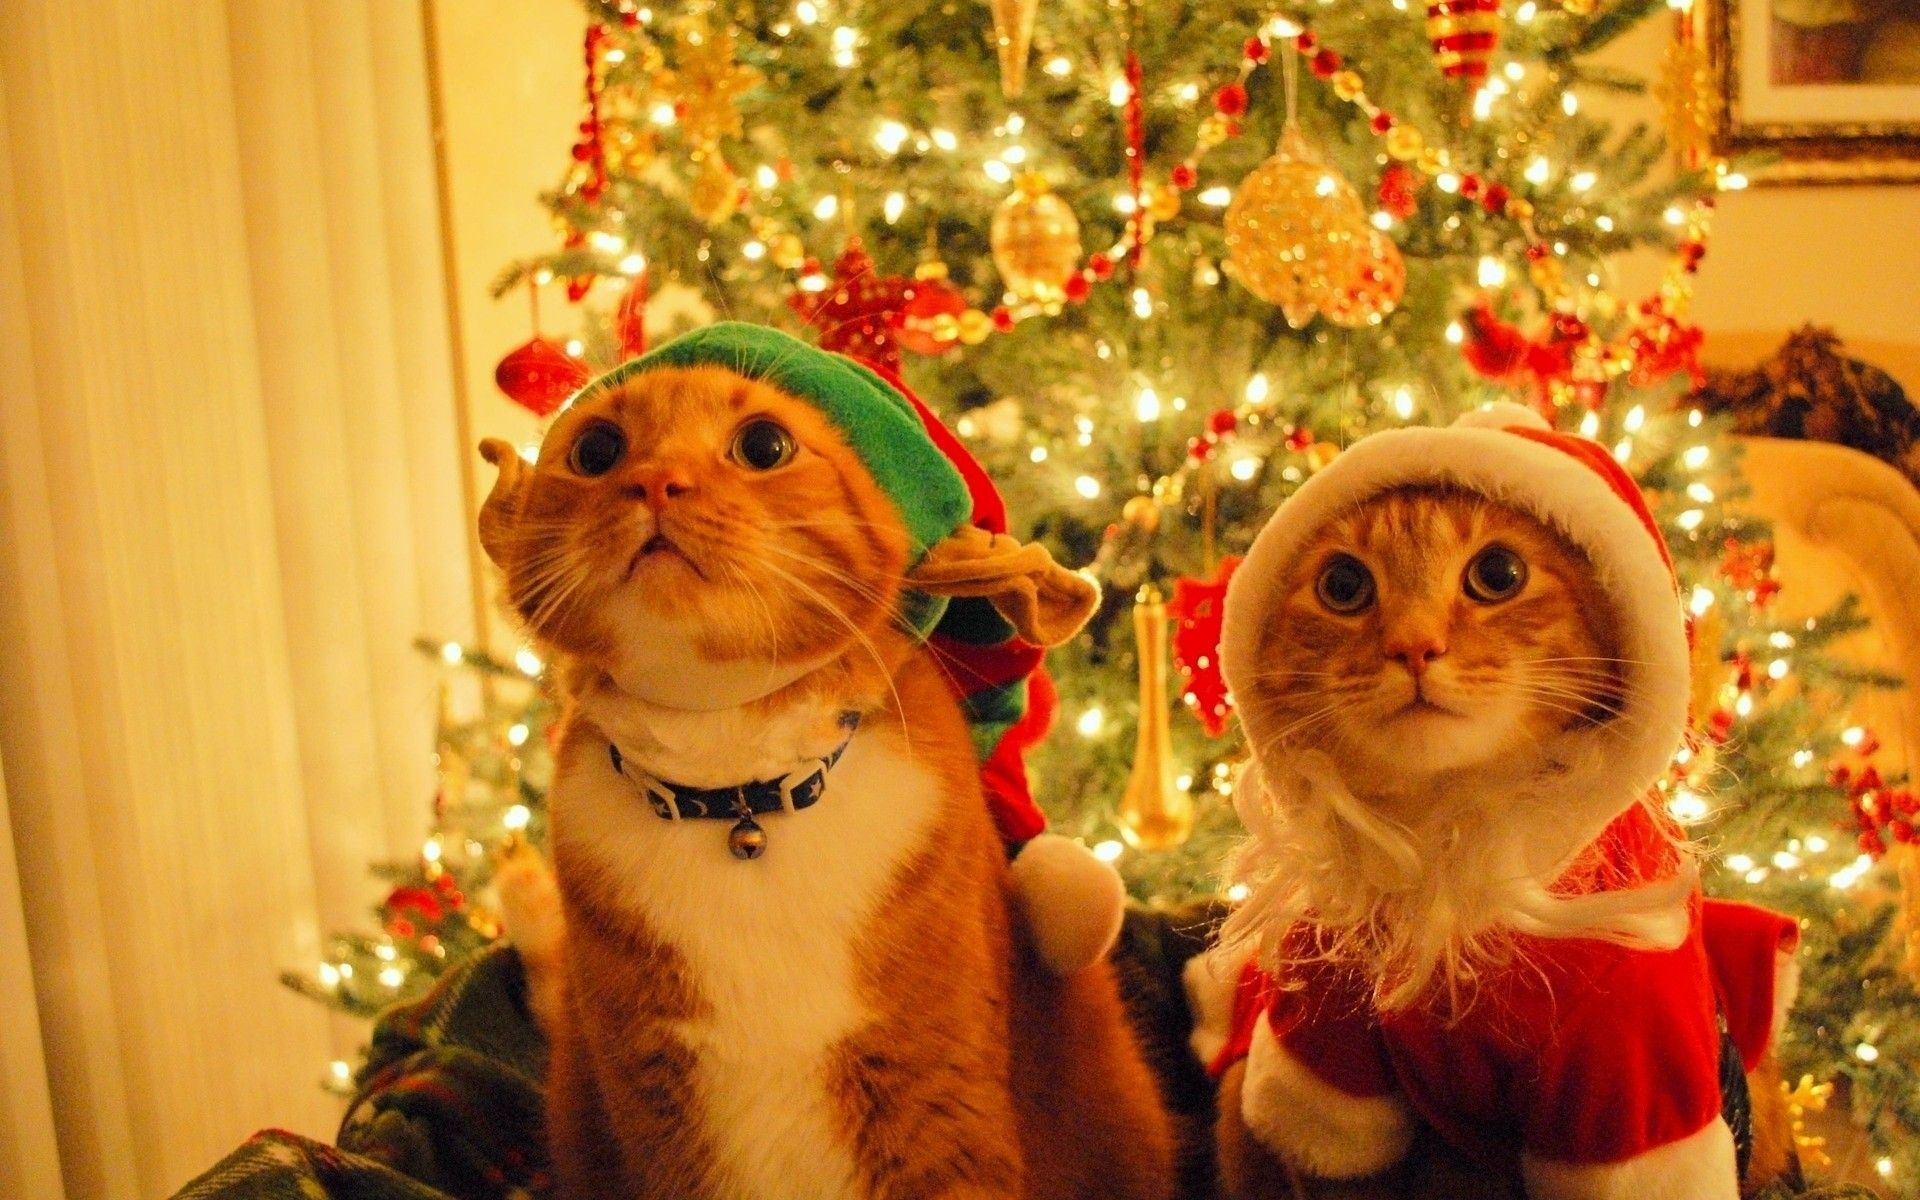 Two Cats Merry Christmas Wallpaper Free Downlo Wallpaper